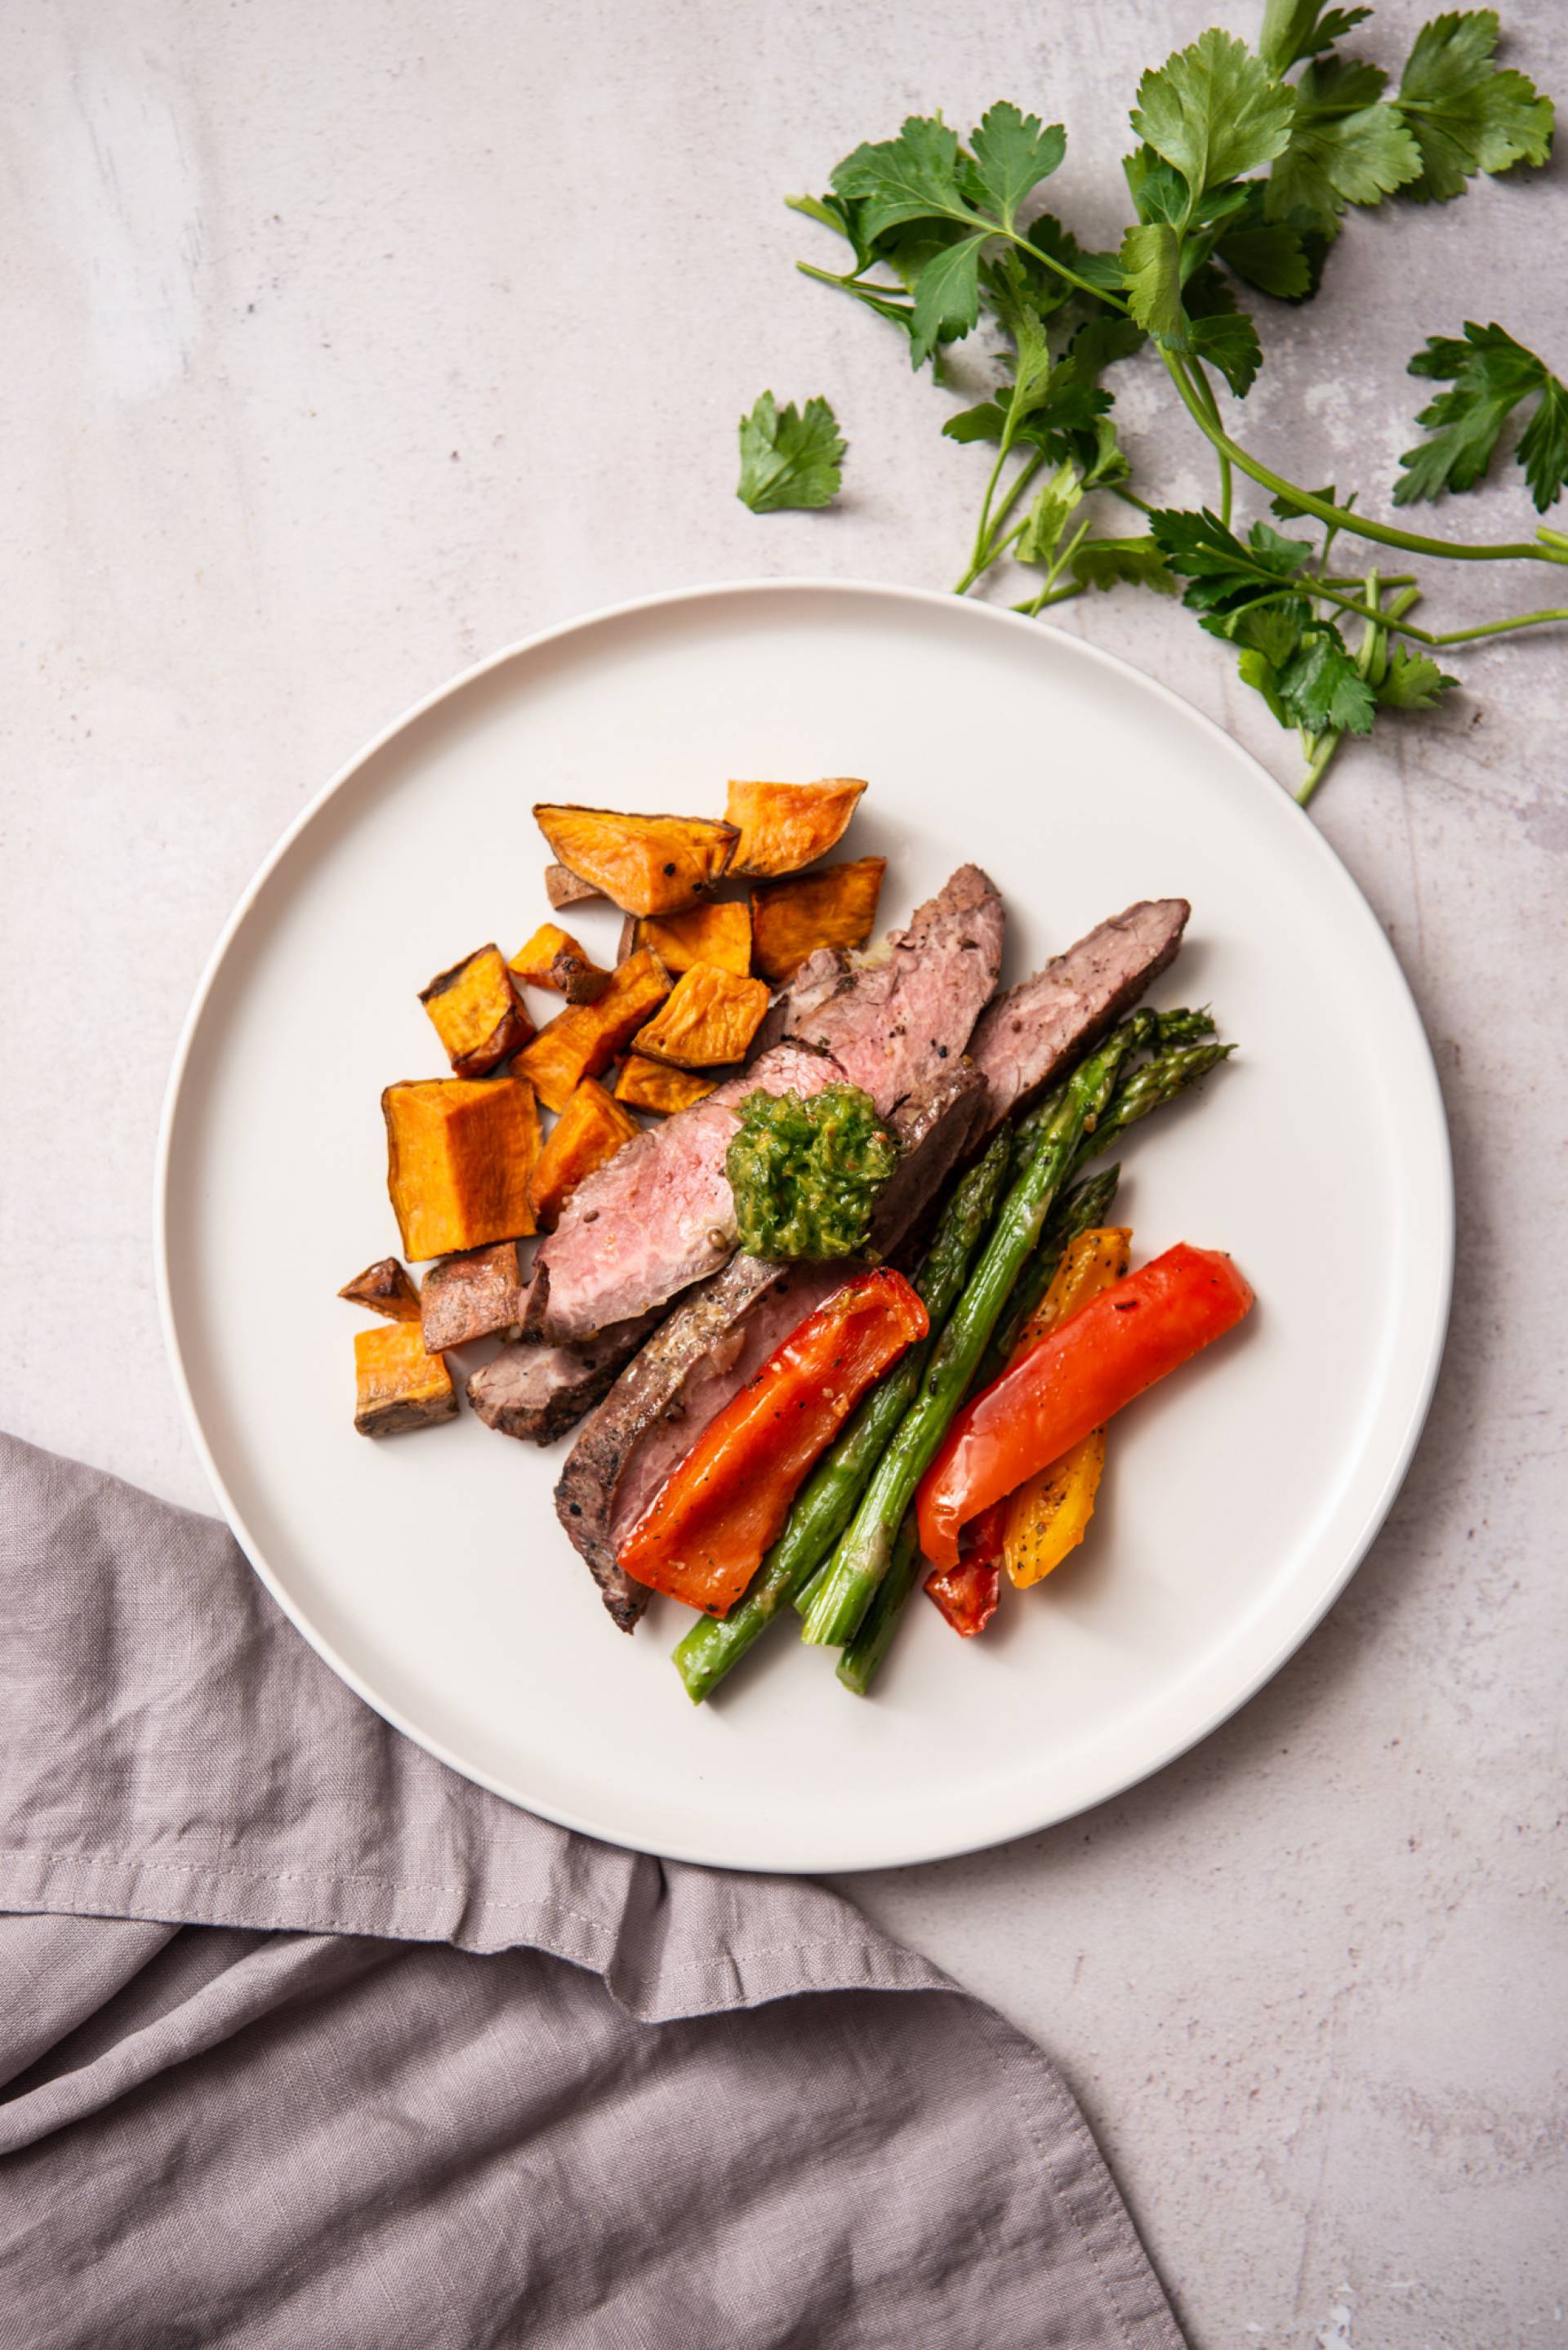 FIT 15: Grilled Flank Steak with Chimichurri